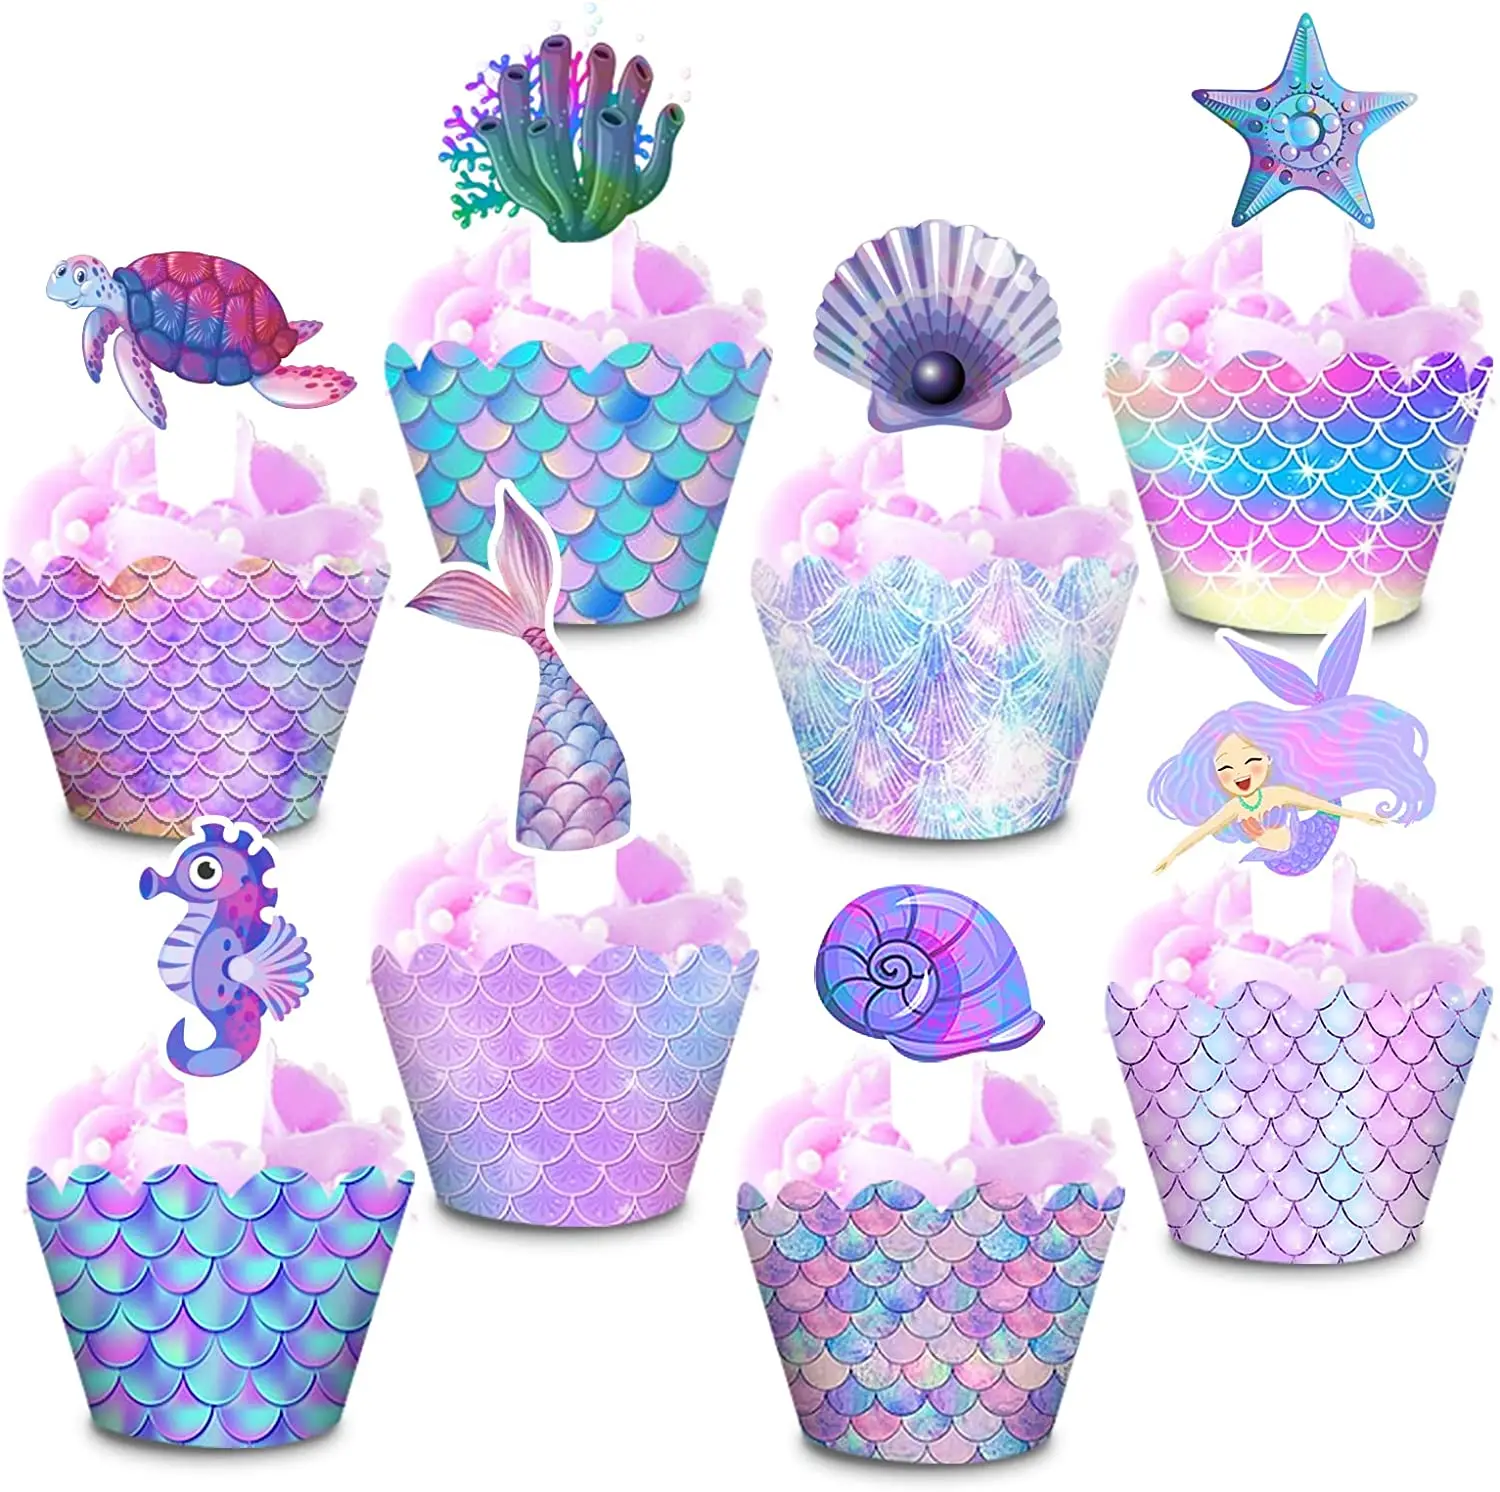 

48 Pcs Mermaid Cupcake Toppers Ocean Cupcake Wrappers Kit for Under The Sea Party Baby Shower Party Favors Cake decor